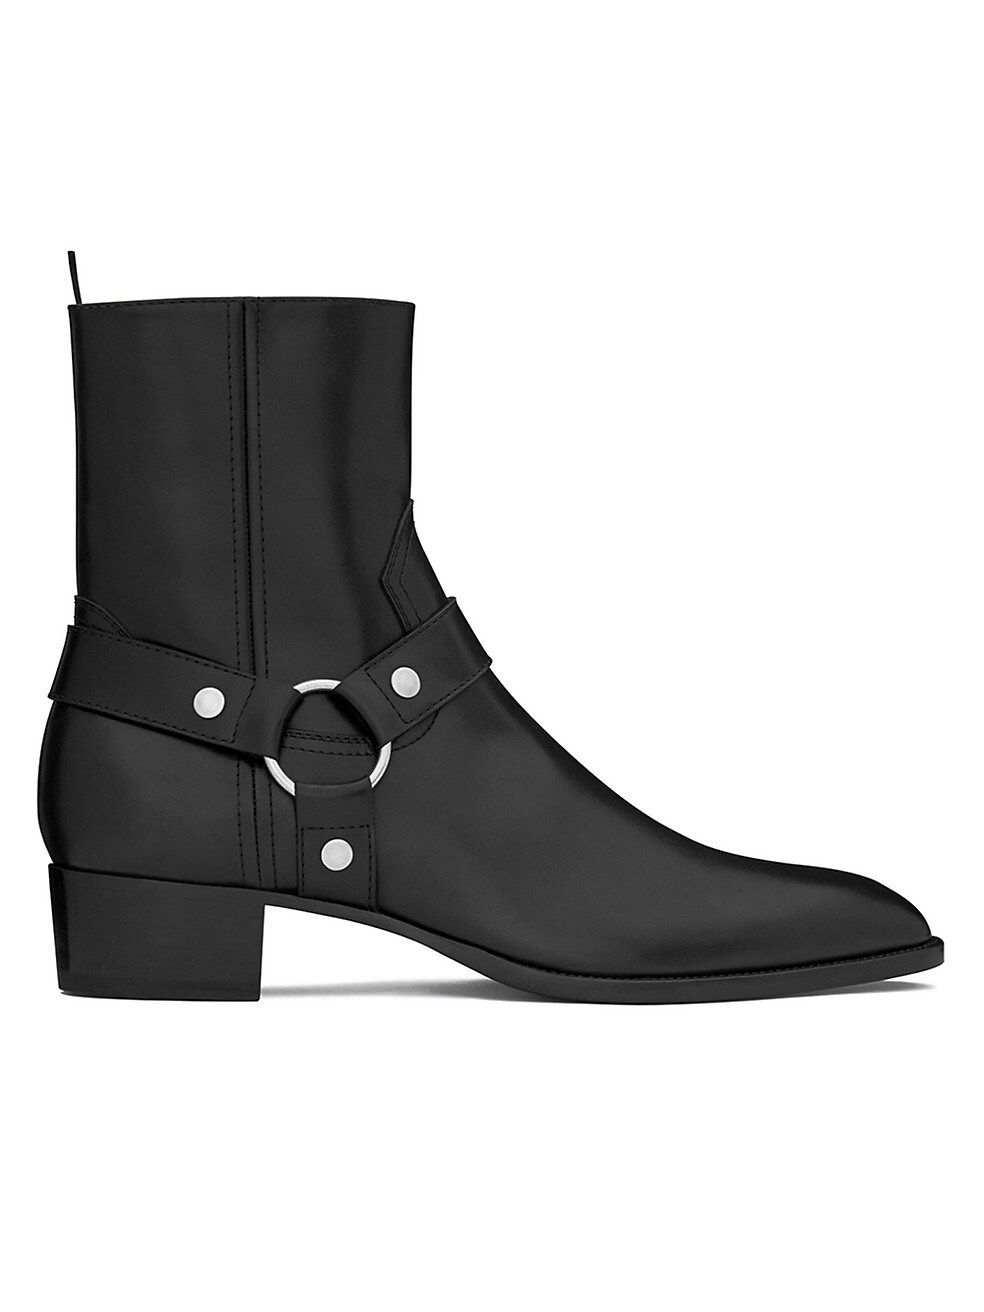 Wyatt Harness Boots In Smooth Leather | Saks Fifth Avenue